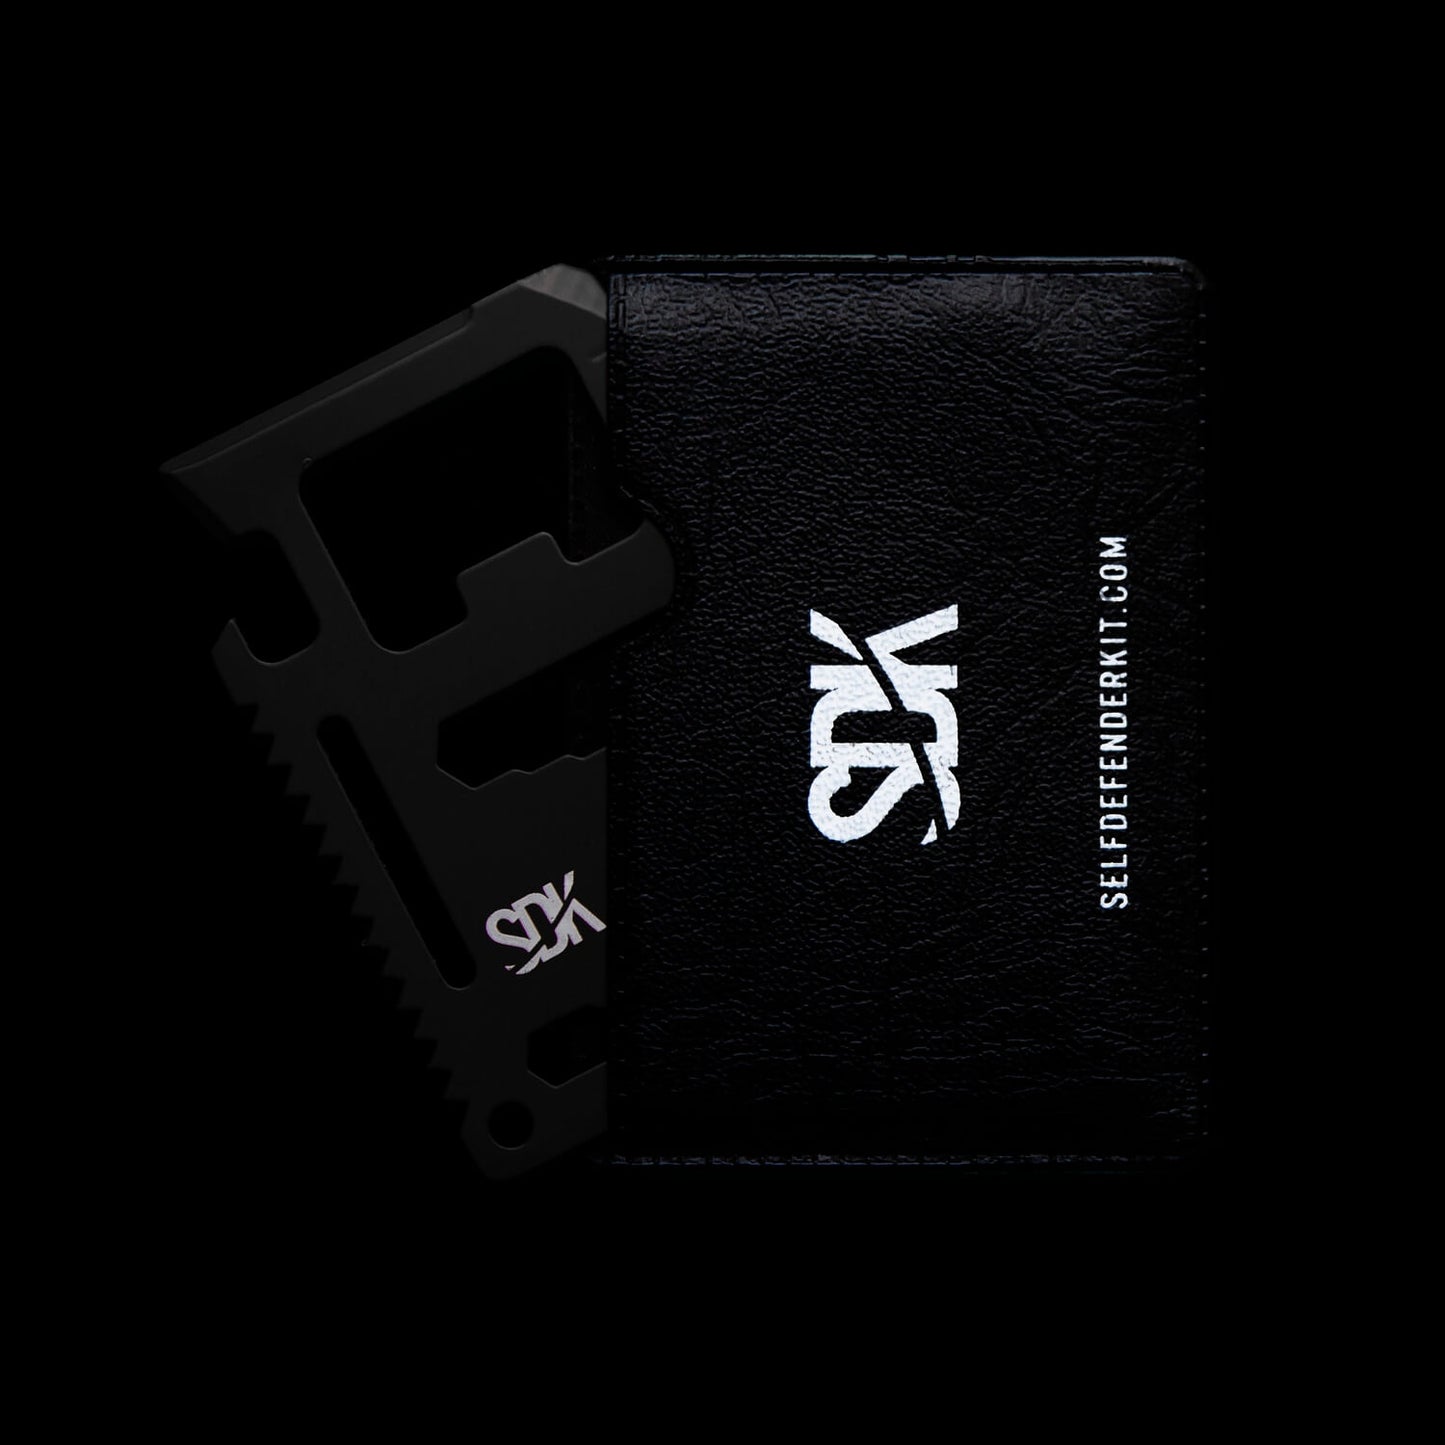 SDK Multi Card Tool, Black with card holder (credit card sized stainless steel tool with 10 functions: Can opener, Knife edge, Screwdriver, Ruler, Cap opener, 2 Position wrench, 4 Position wrench, Butterfly wrench, Saw blade and Direction ancillary indication)